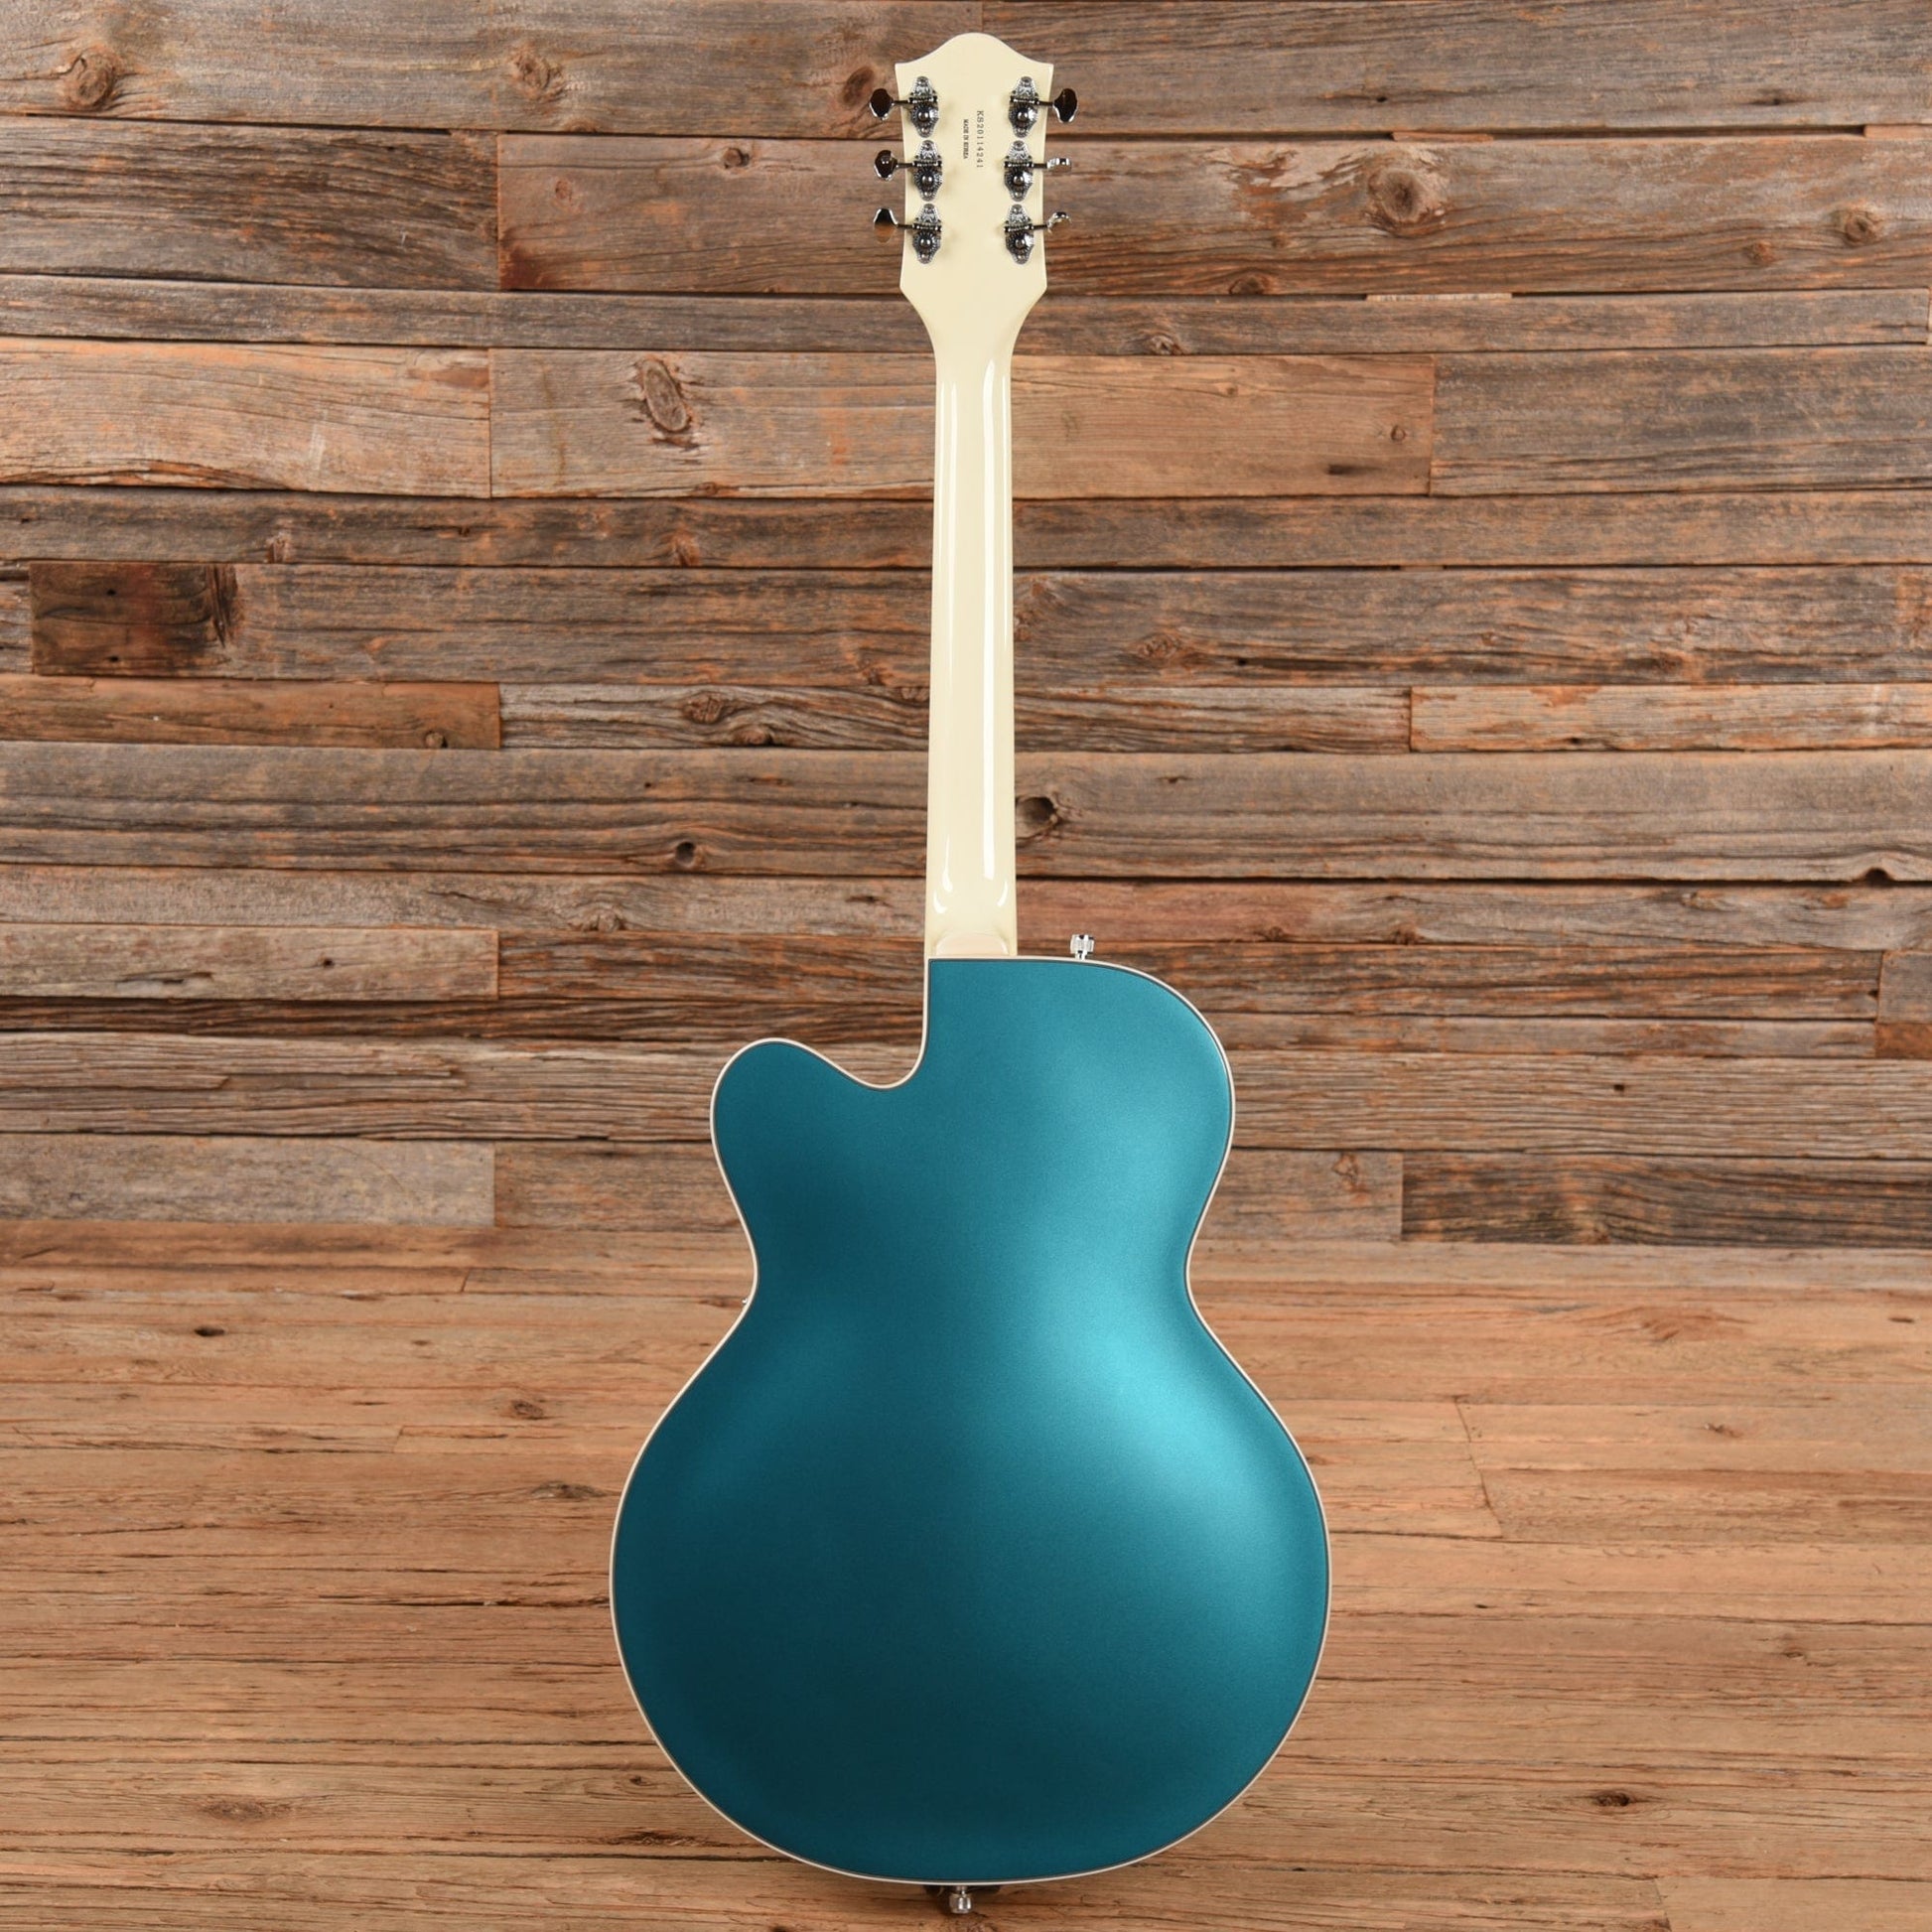 Gretsch G5410T Electromatic Tri-Five Two Tone Ocean Turquoise/Vintage White 2020 Electric Guitars / Hollow Body